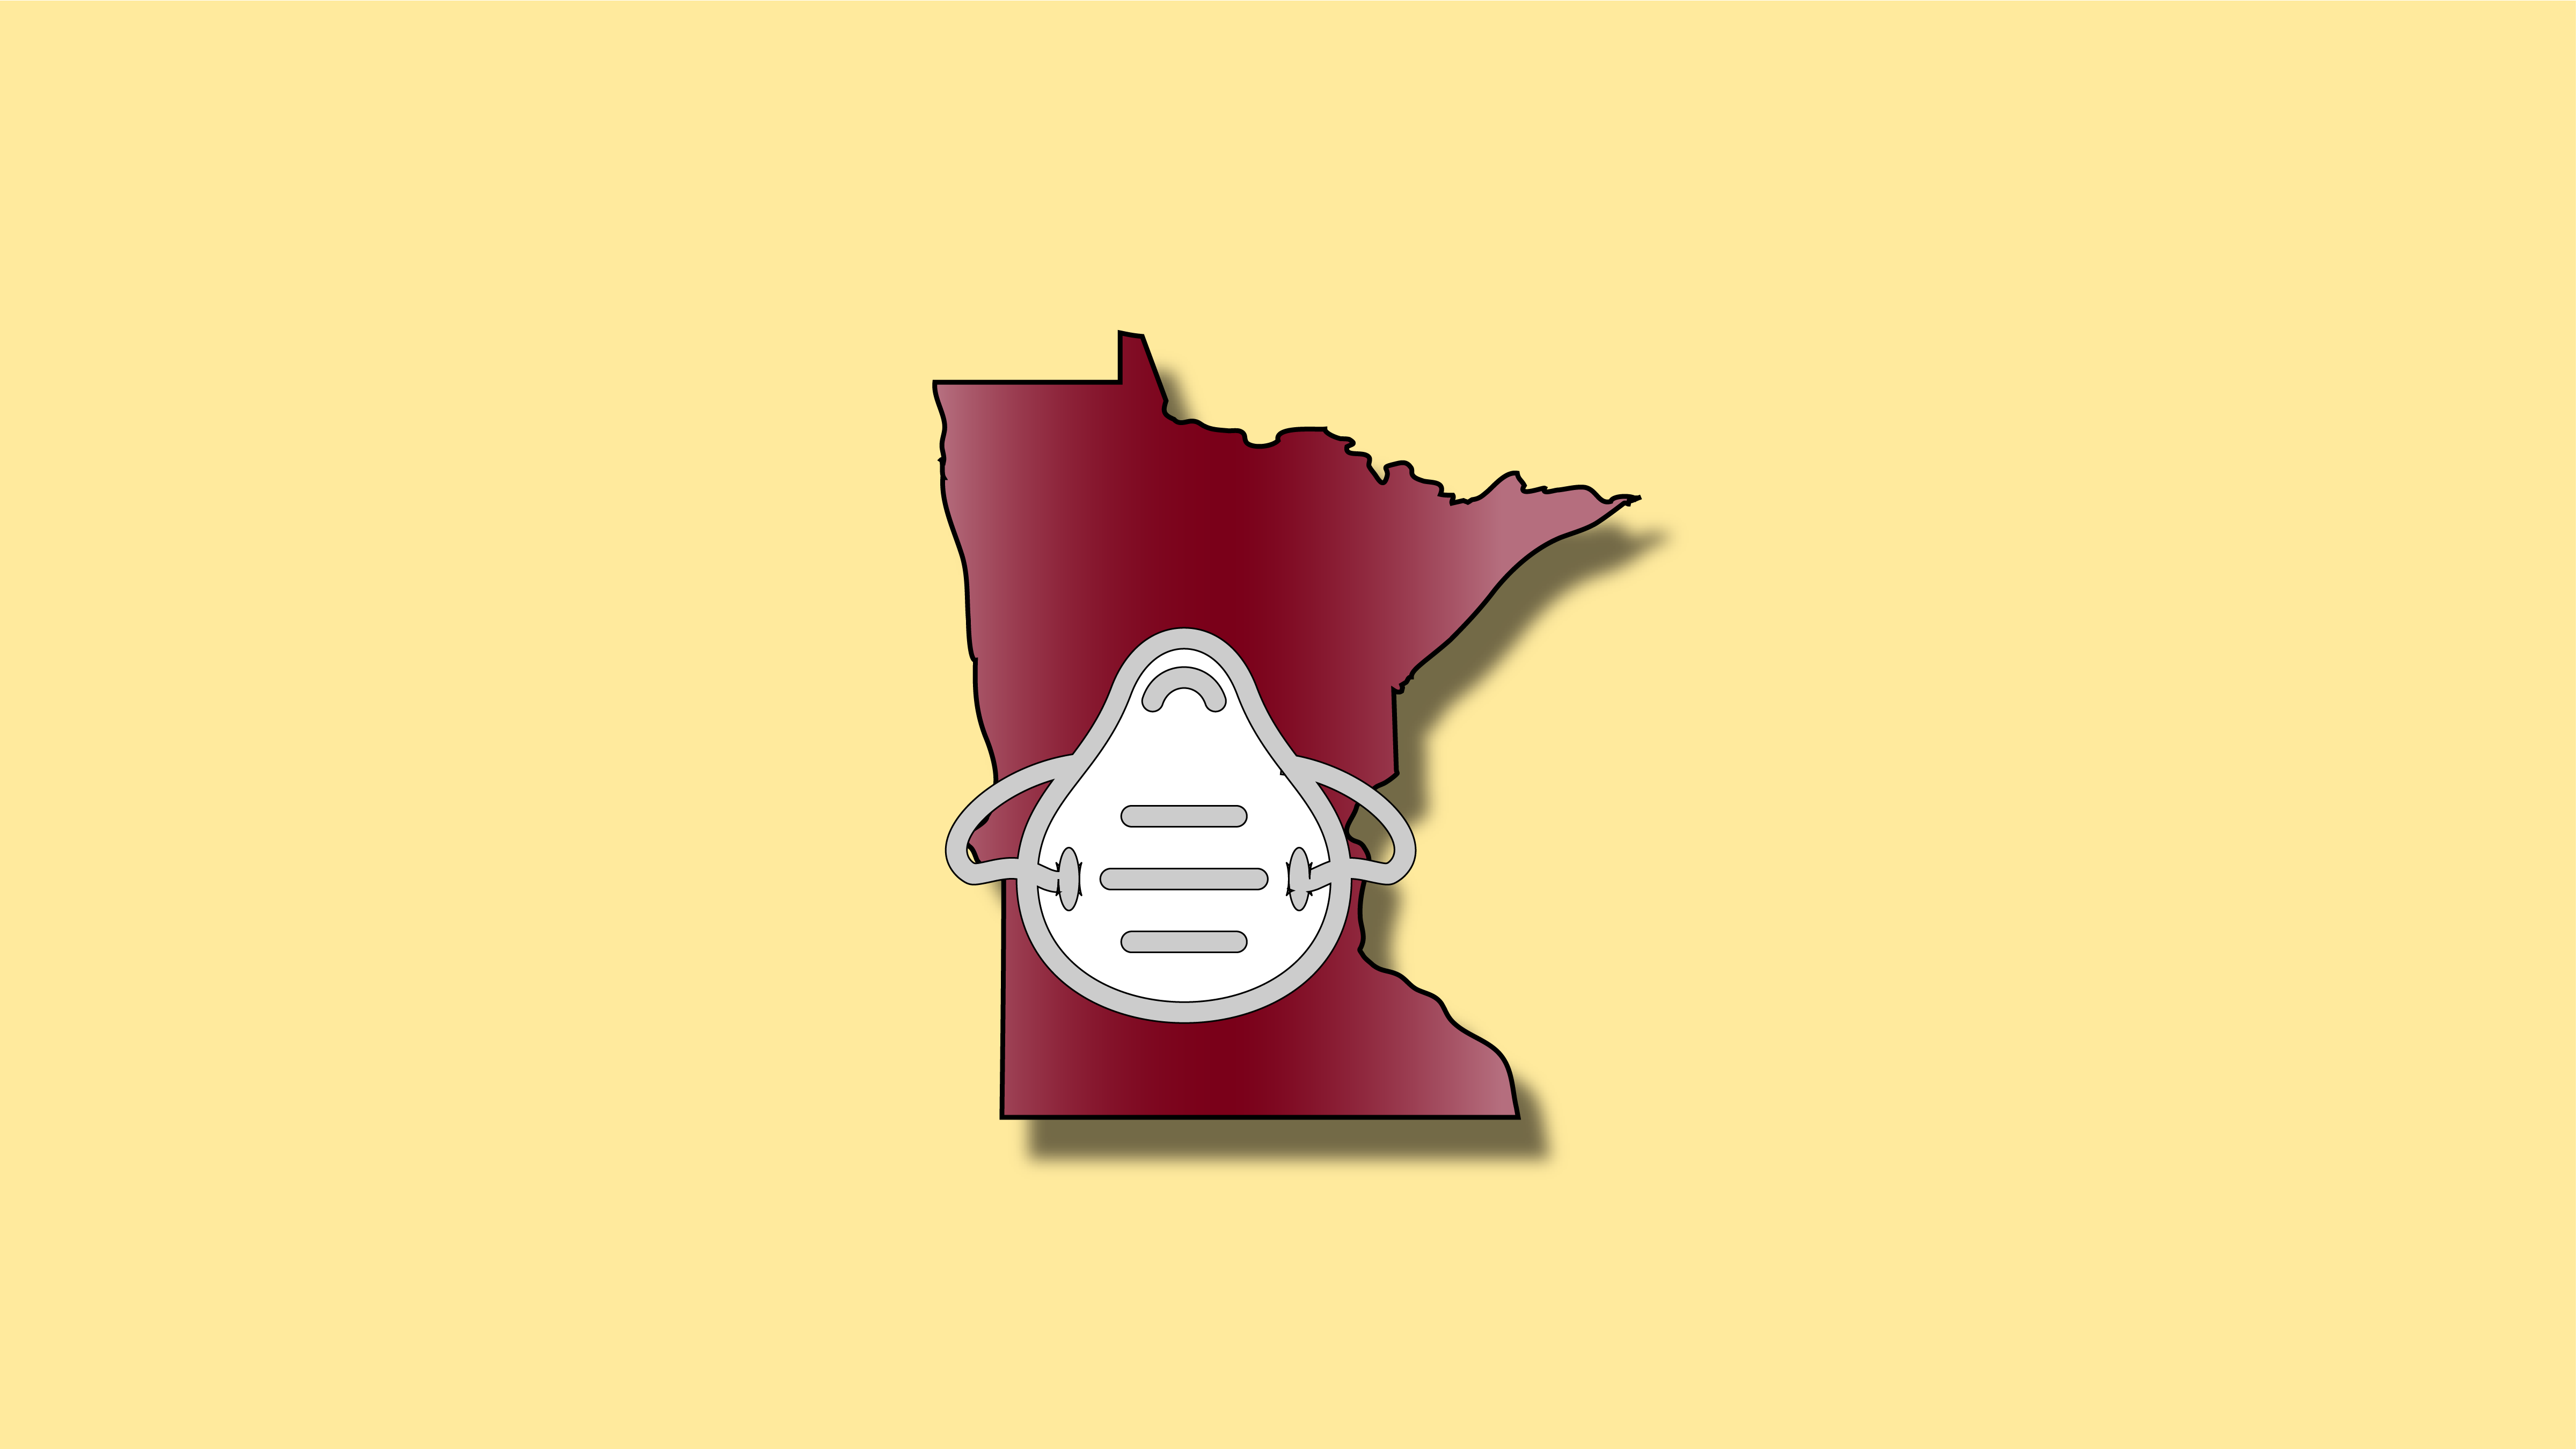 Illustration of the outline of Minnesota with a respirator mask on top of it